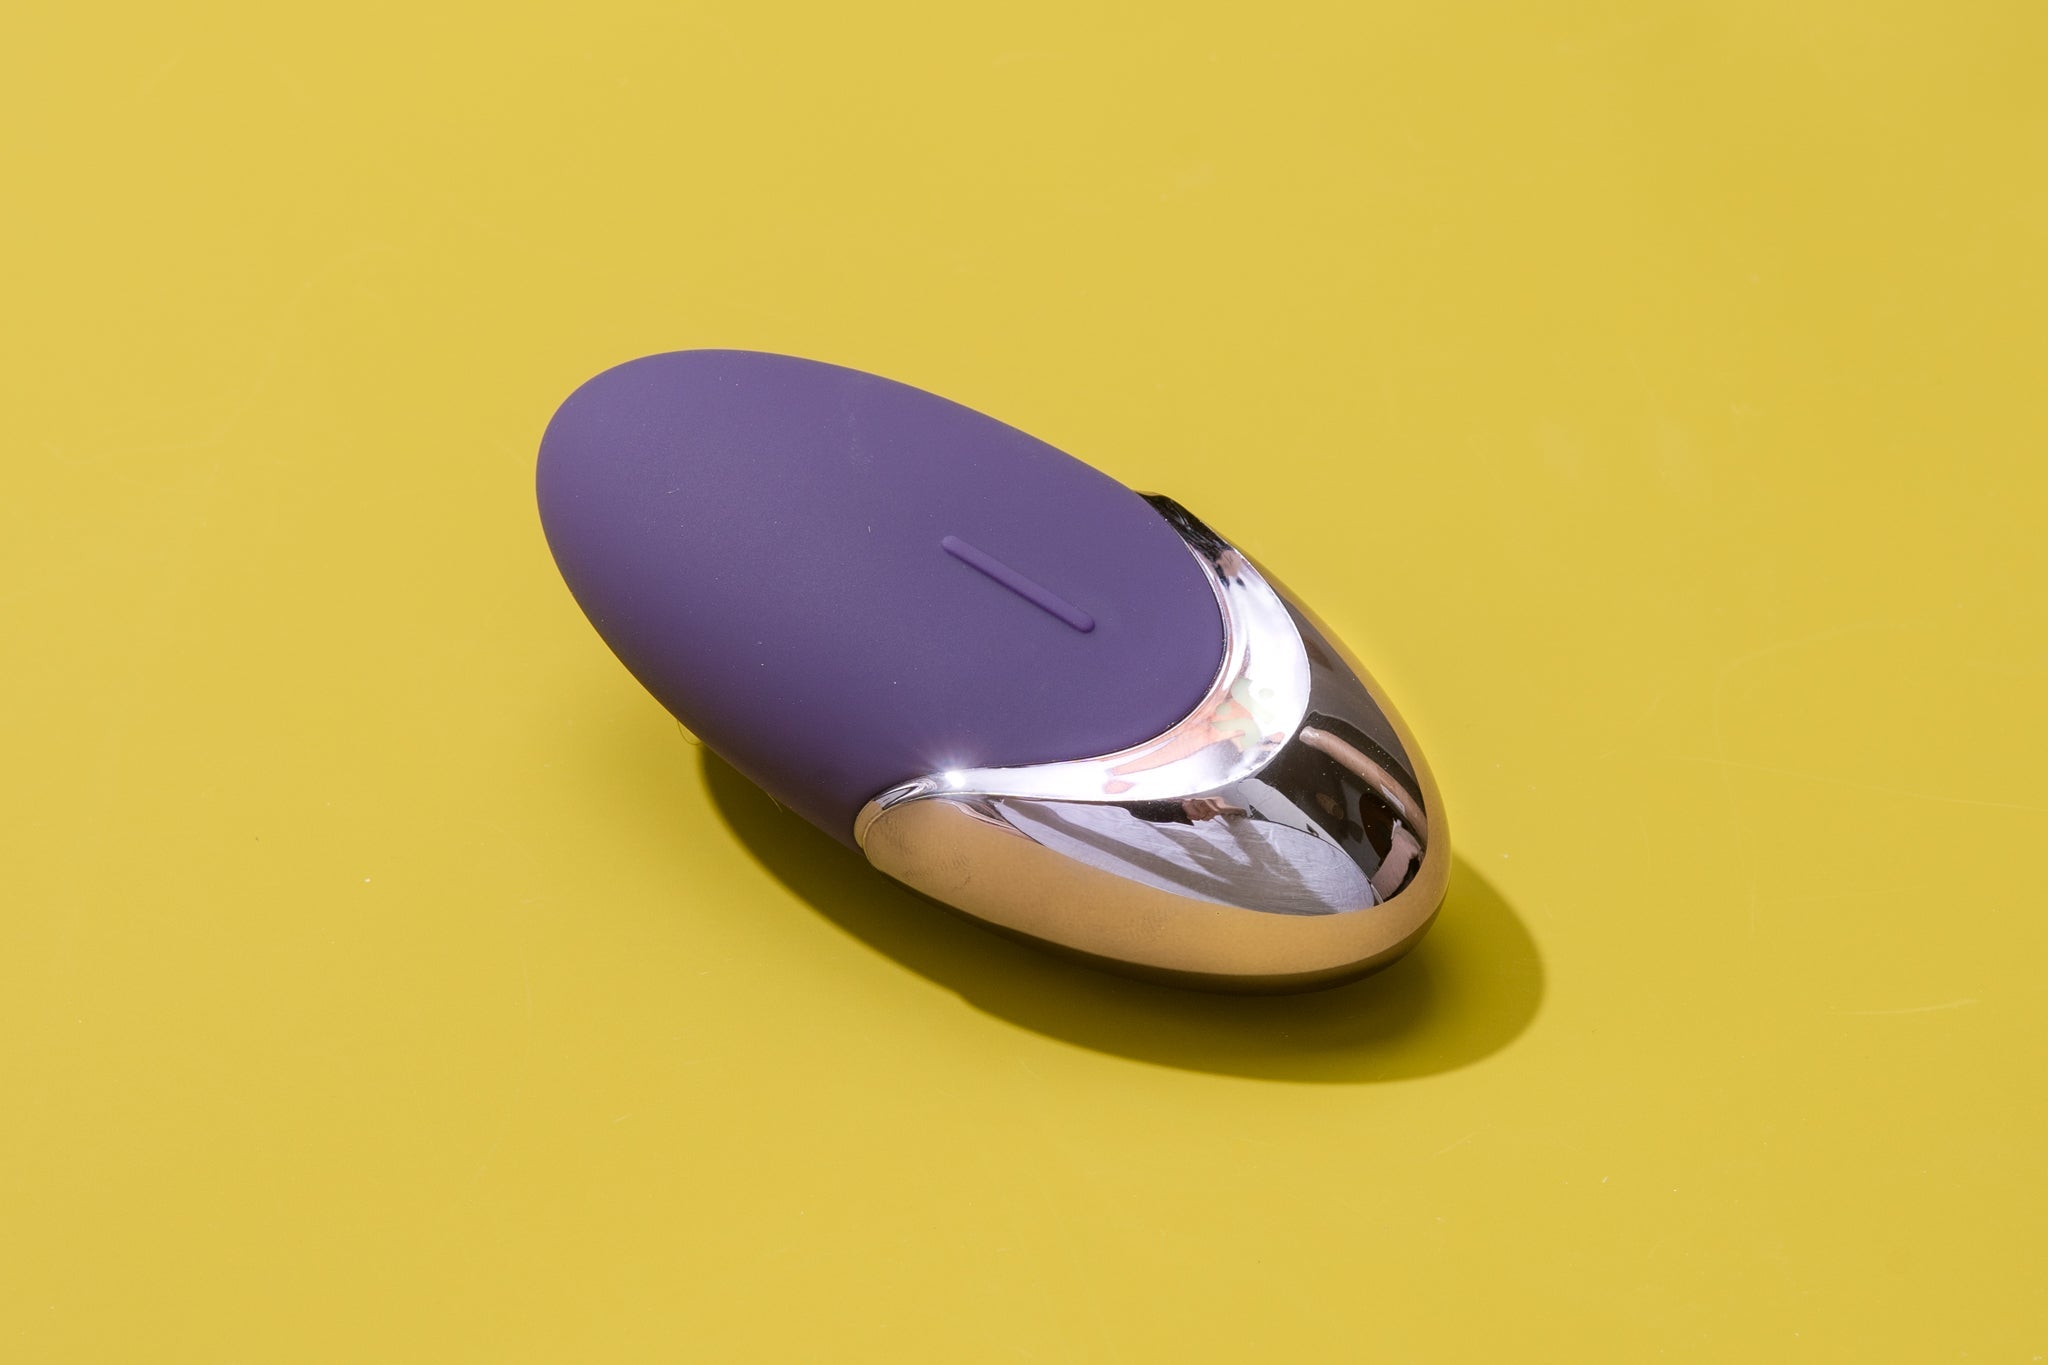 Vibrator on a yellow background